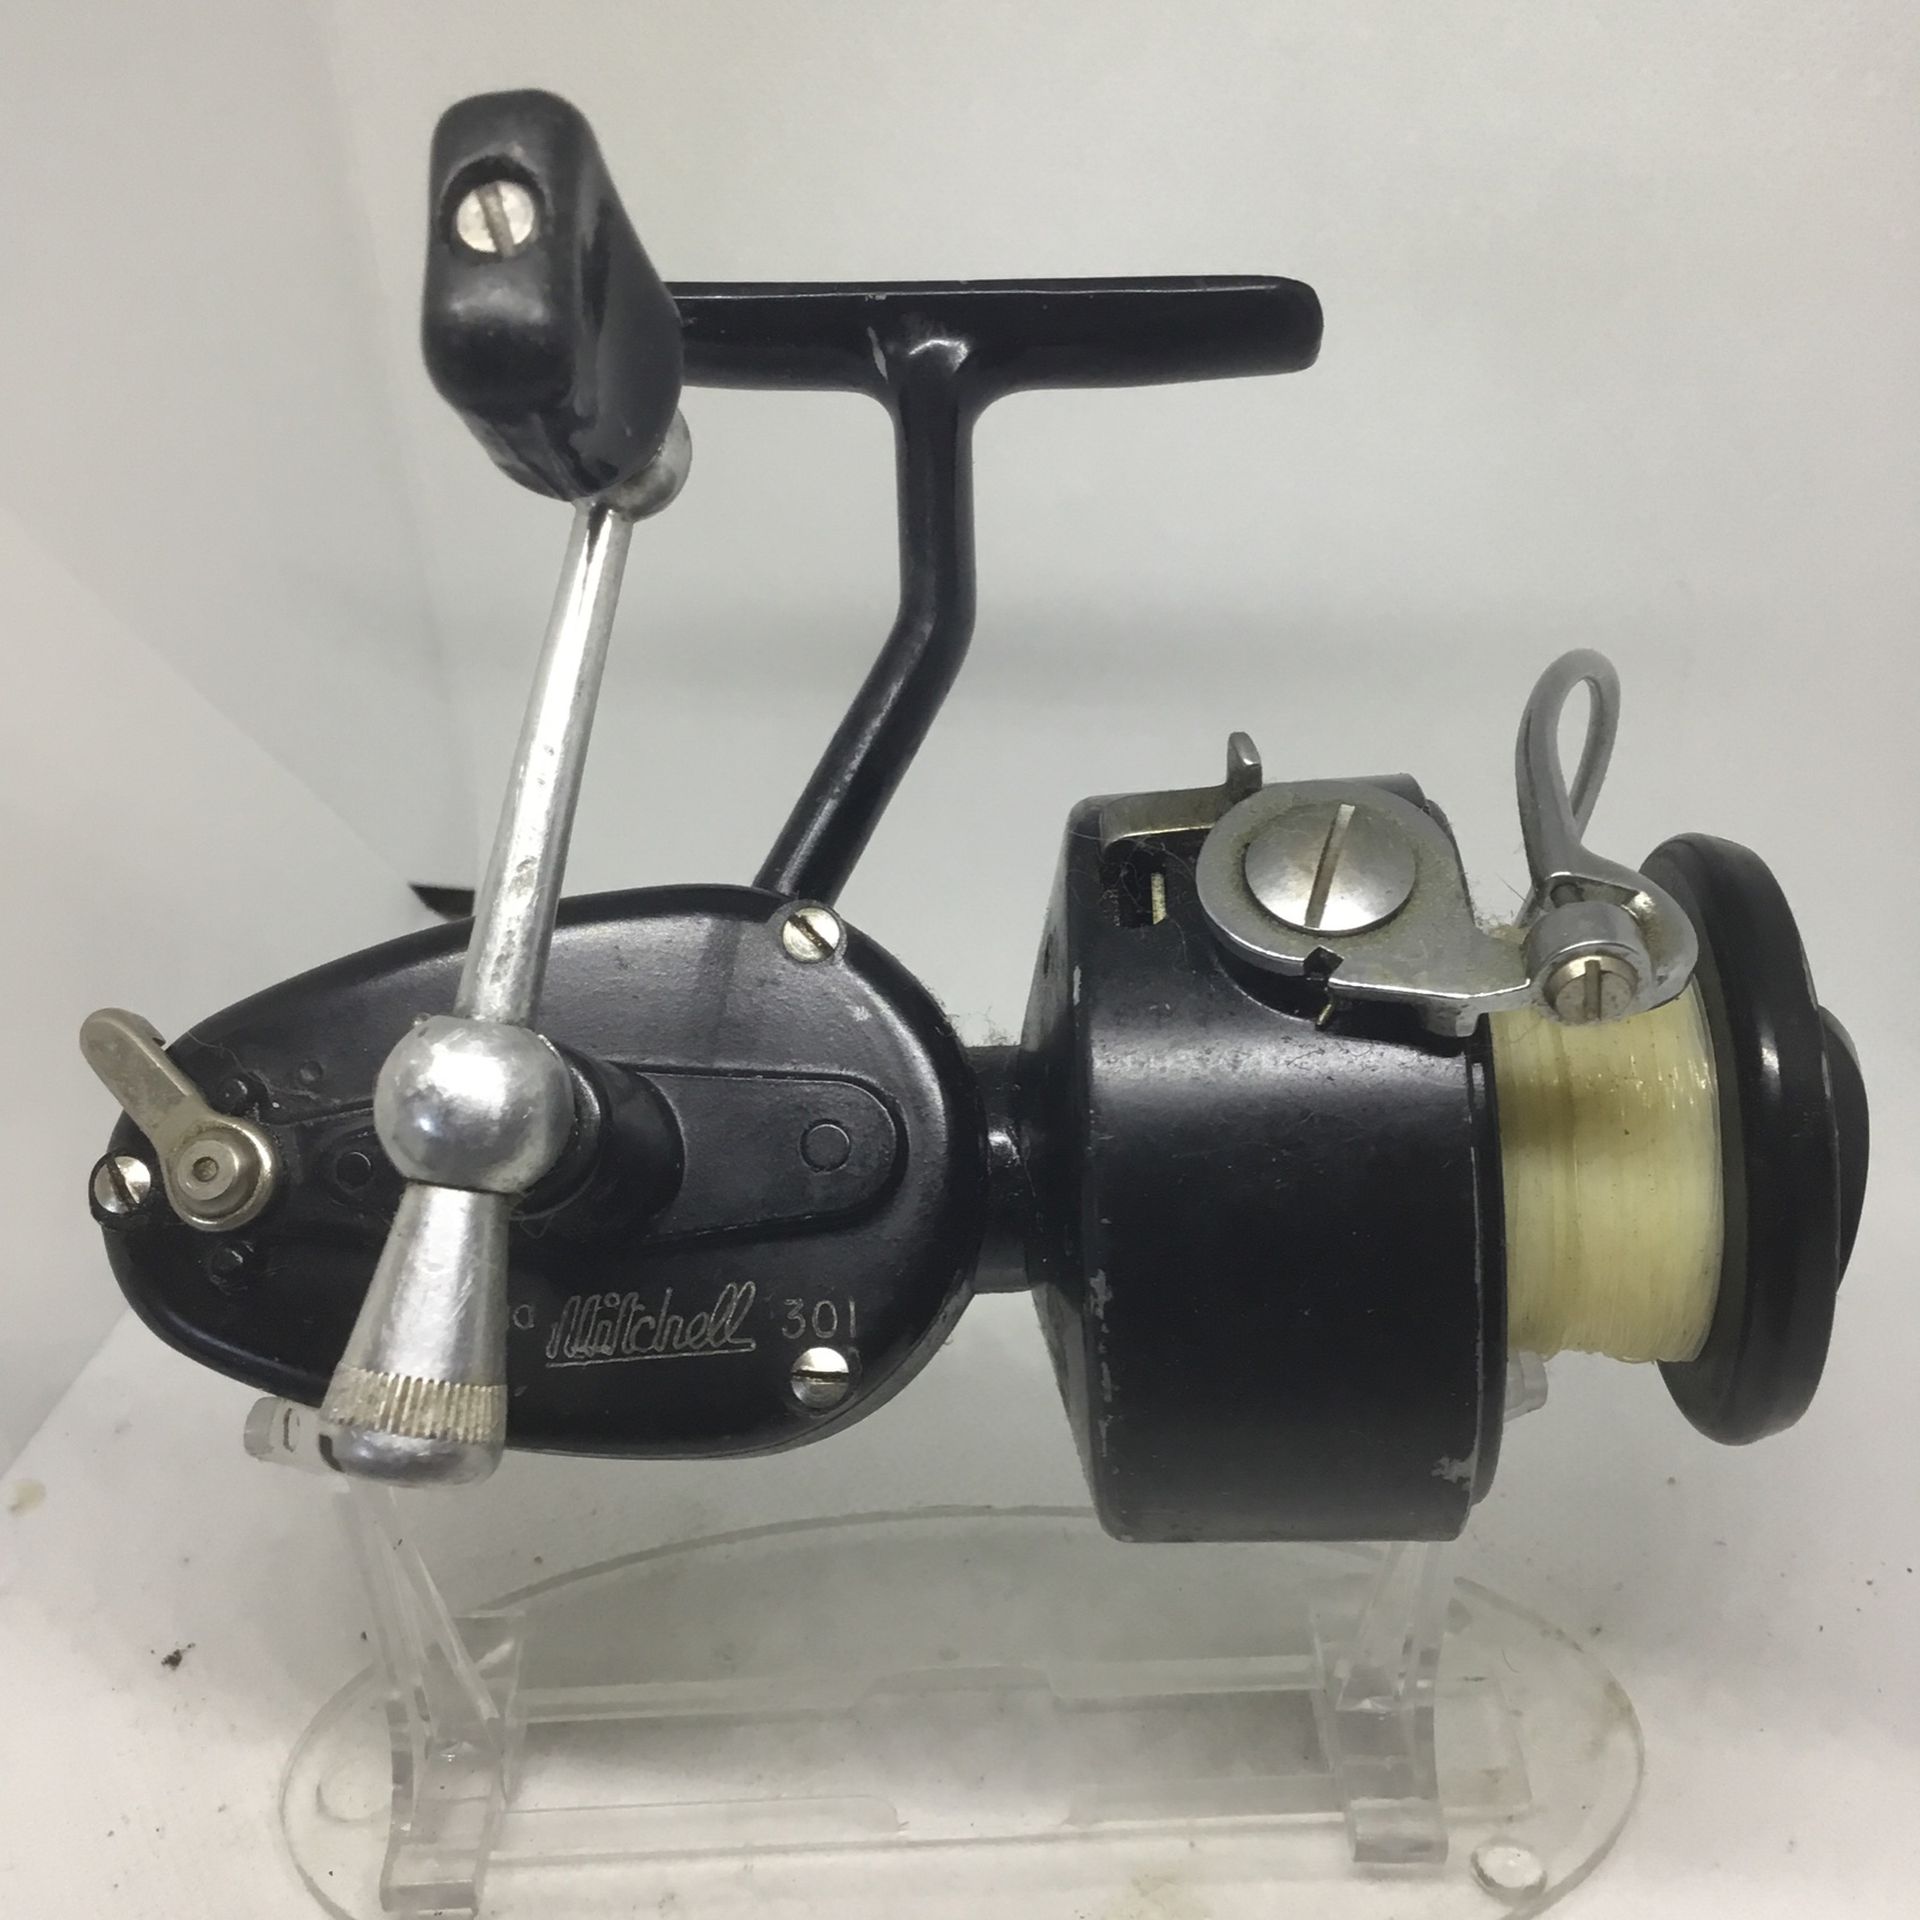 Garcia Mitchell 301 Left Handed Spinning Reel - Very Good Condition 